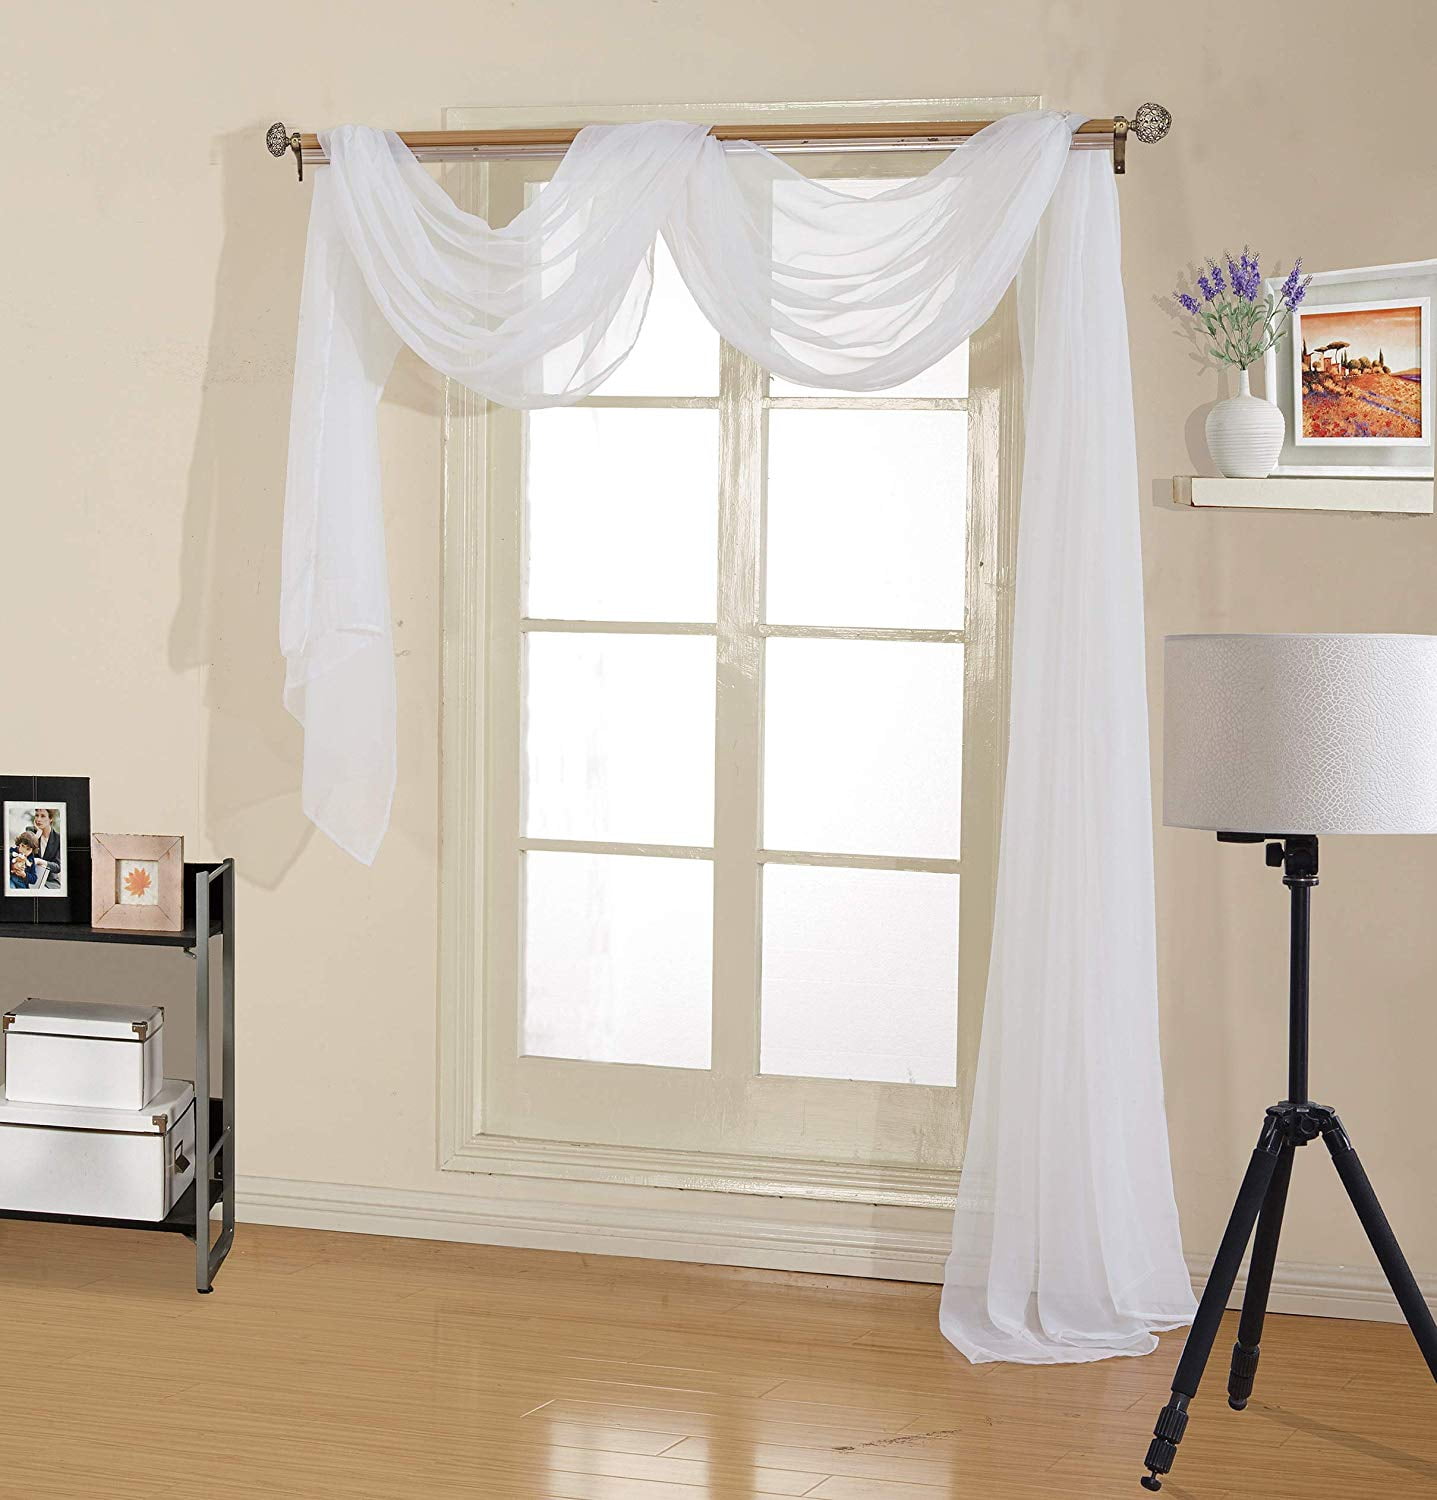 Decotex Premium Sheer Voile Scarf Valance for Home & Event Designs (54" X 216", White)